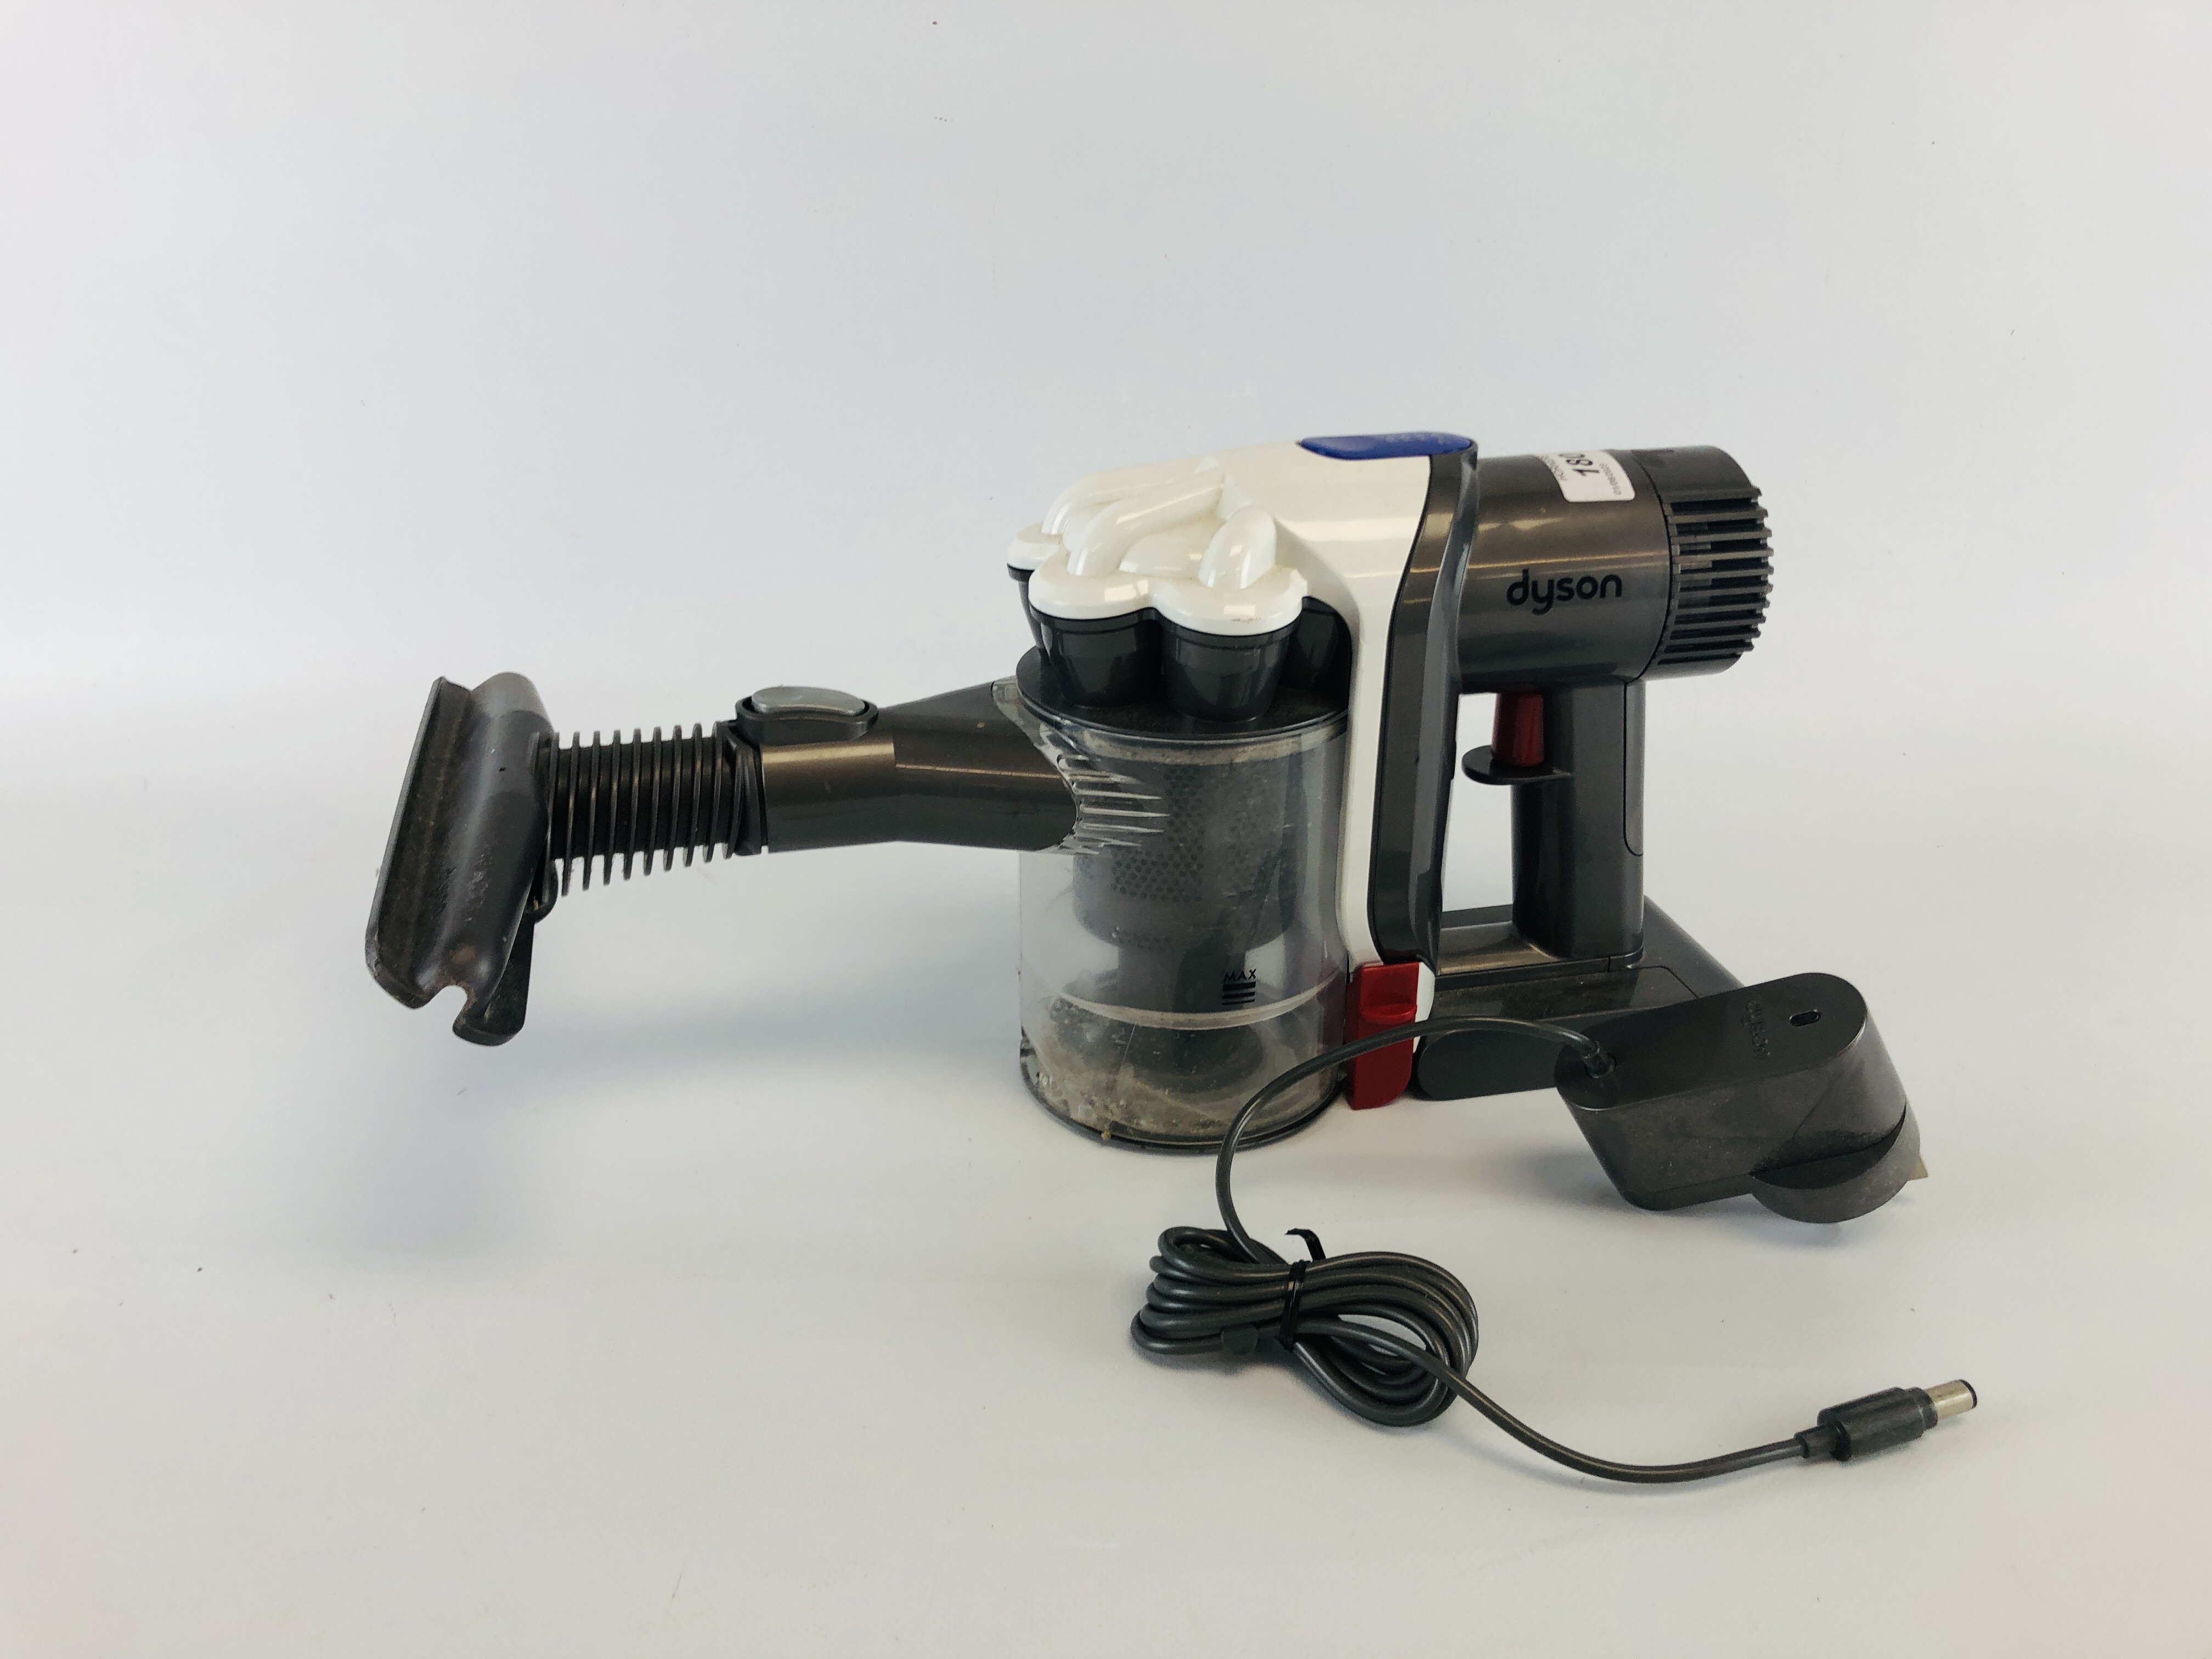 A CORDLESS DYSON DC30 HAND HELD VACUUM CLEANER COMPLETE WITH CHARGER - SOLD AS SEEN.